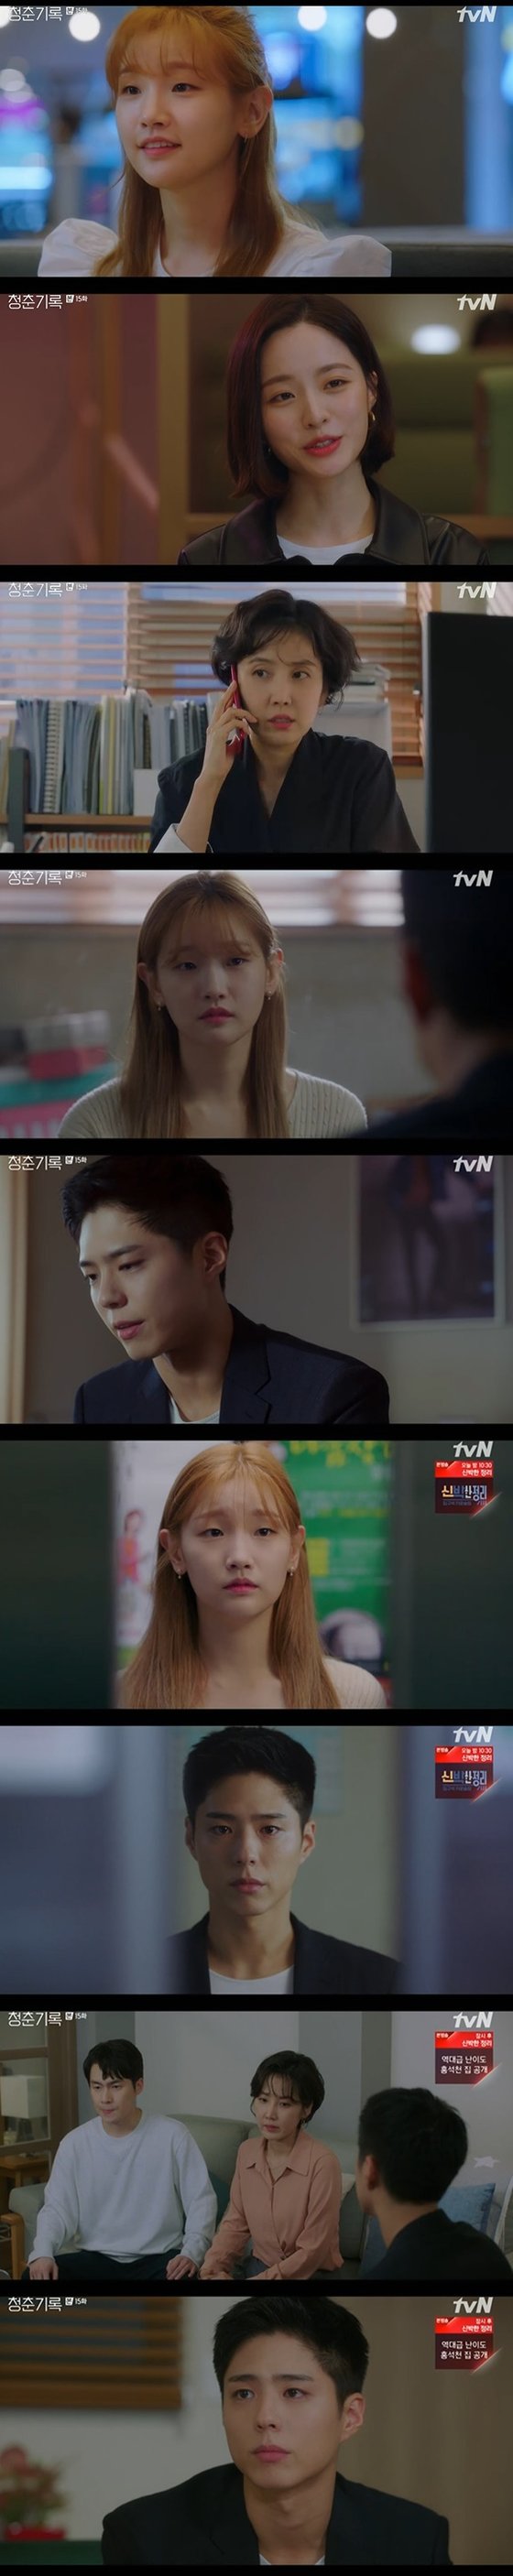 Record of Youth Park Bo-gum and Park So-dam have a loving but sad farewell: The walls of reality are high and high.On the TVN Monday-Tuesday drama Record of Youth, which was broadcast on the afternoon of the 26th, the story about the meeting between Park So-dam (Stability Ha) and Bae Yunkyoung (Kim Soo-man) was revealed.When Bae Yunkyoung asked if he was dating Park Bo-gum (Sah Hye-joon), Park So-dam said, Ive never dated him.Sa Hye-joon is one of the entertainers who make up, and it is true that he felt like a friend because he was the same age. Bae Yunkyoung repeatedly asked about Park Bo-gum and said that he had changed after he floated.Not only did he say a discredited remark about Park Bo-gum, but he also made Park So-dams mood unpleasant, referring to his ex-girlfriend, Seol In-ah.Park Bo-gum repeatedly contacted Park So-dam but did not reach him; deliberately avoided; as these moments repeated, the number of apology increased.Park So-dam recalled the past: What do you say Im sorry for love? You do better. Why do you say youre sorry?I will never say Im sorry, but I could not keep it.Like Park So-dams narration, love had many meanings, and the two loved it but chose to part ways: I love you, lets break up.Remember, I will never say Im sorry if I love you? He said, I know that Sa Hye-joon is a person who keeps what he said.Ill go back to my daily life before I love you. At the end of the broadcast, Park Bo-gum came back to Park So-dam and tried to catch him, saying, I cant break up with you.That sad parting was met: Bae Yunkyoung was sued for defamation after writing only malicious articles directed at Park Bo-gum.Although it had to be agreed, the company turned away and was belatedly outraged to learn that the perpetrator was Lee Chang-hoon (Lee Tae-soo) and the victim was Park Bo-gum through Seol In-ah.Bae Yunkyoung rose to his feet, saying Im going to smash it towards Lee Chang-hoon.Bae Yunkyoung appeared on the entertainment program, revealing the truth of rumors about Park Bo-gum; Shin Dong-mi released the last text sent by Lee Seung-jun (Charlie Jung).What I thought was the best choice, but Park Bo-gums idea was different.Shin Dong-mi expressed his sincere desire to prevent rumors before the contract was renewed, saying, I think that the controversy is not cooled down because of the controversy.Meanwhile, Park Soo-young (Sayoungnam) became manager of his father, Han Jin-hee (Samingi), and Aung Daung, the rich man, boasted a ripe mode of warm-hoon.